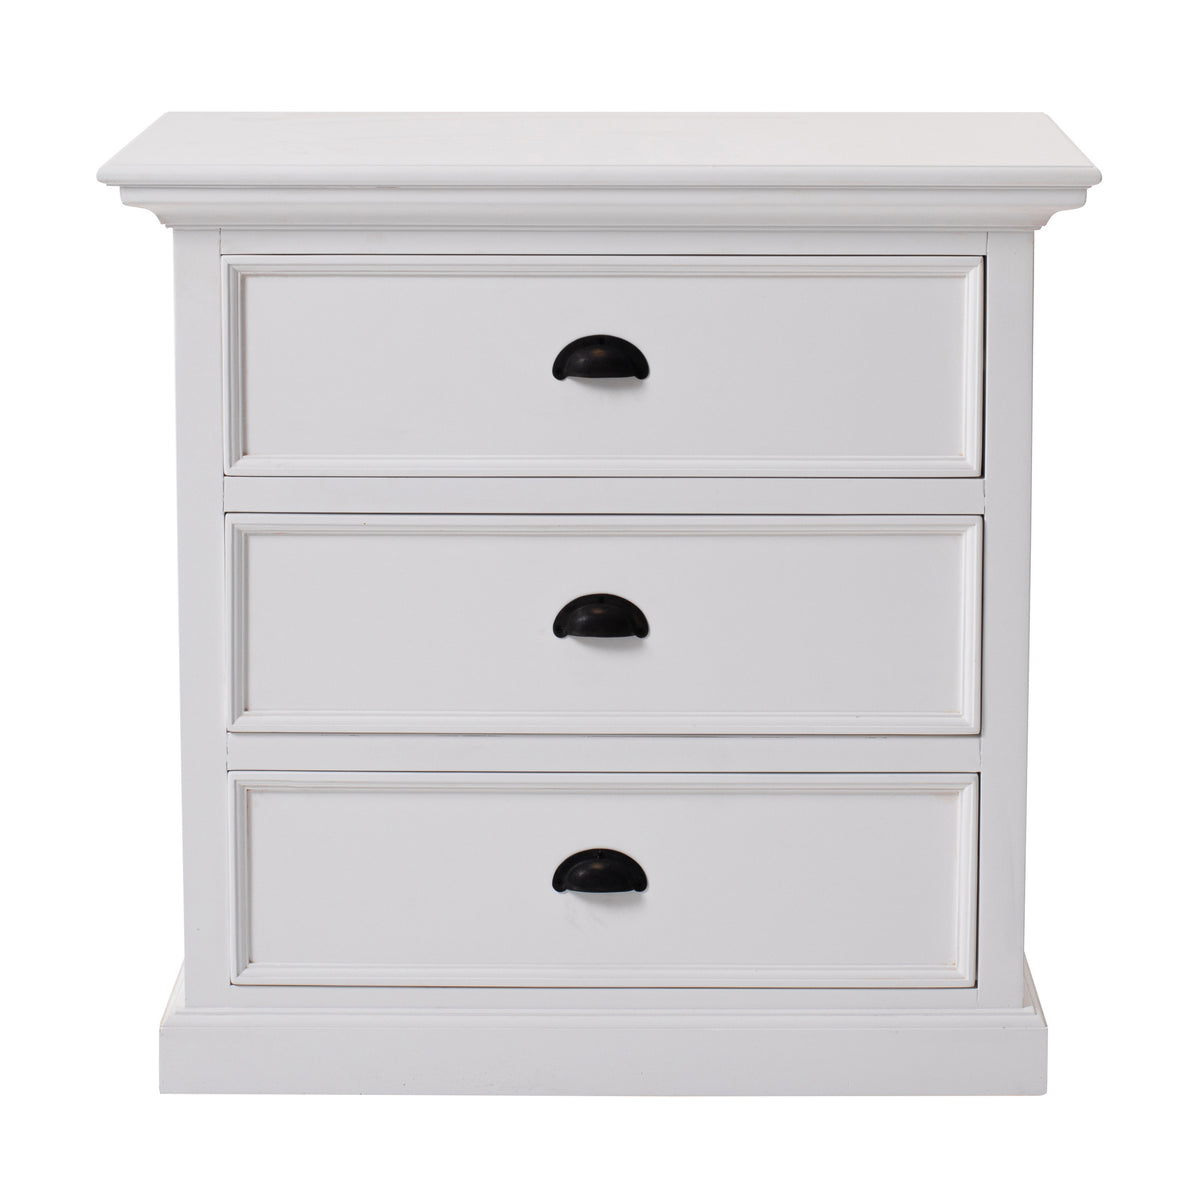 Halifax Grand 3 Drawer Bedside Table - Classic White - Notbrand